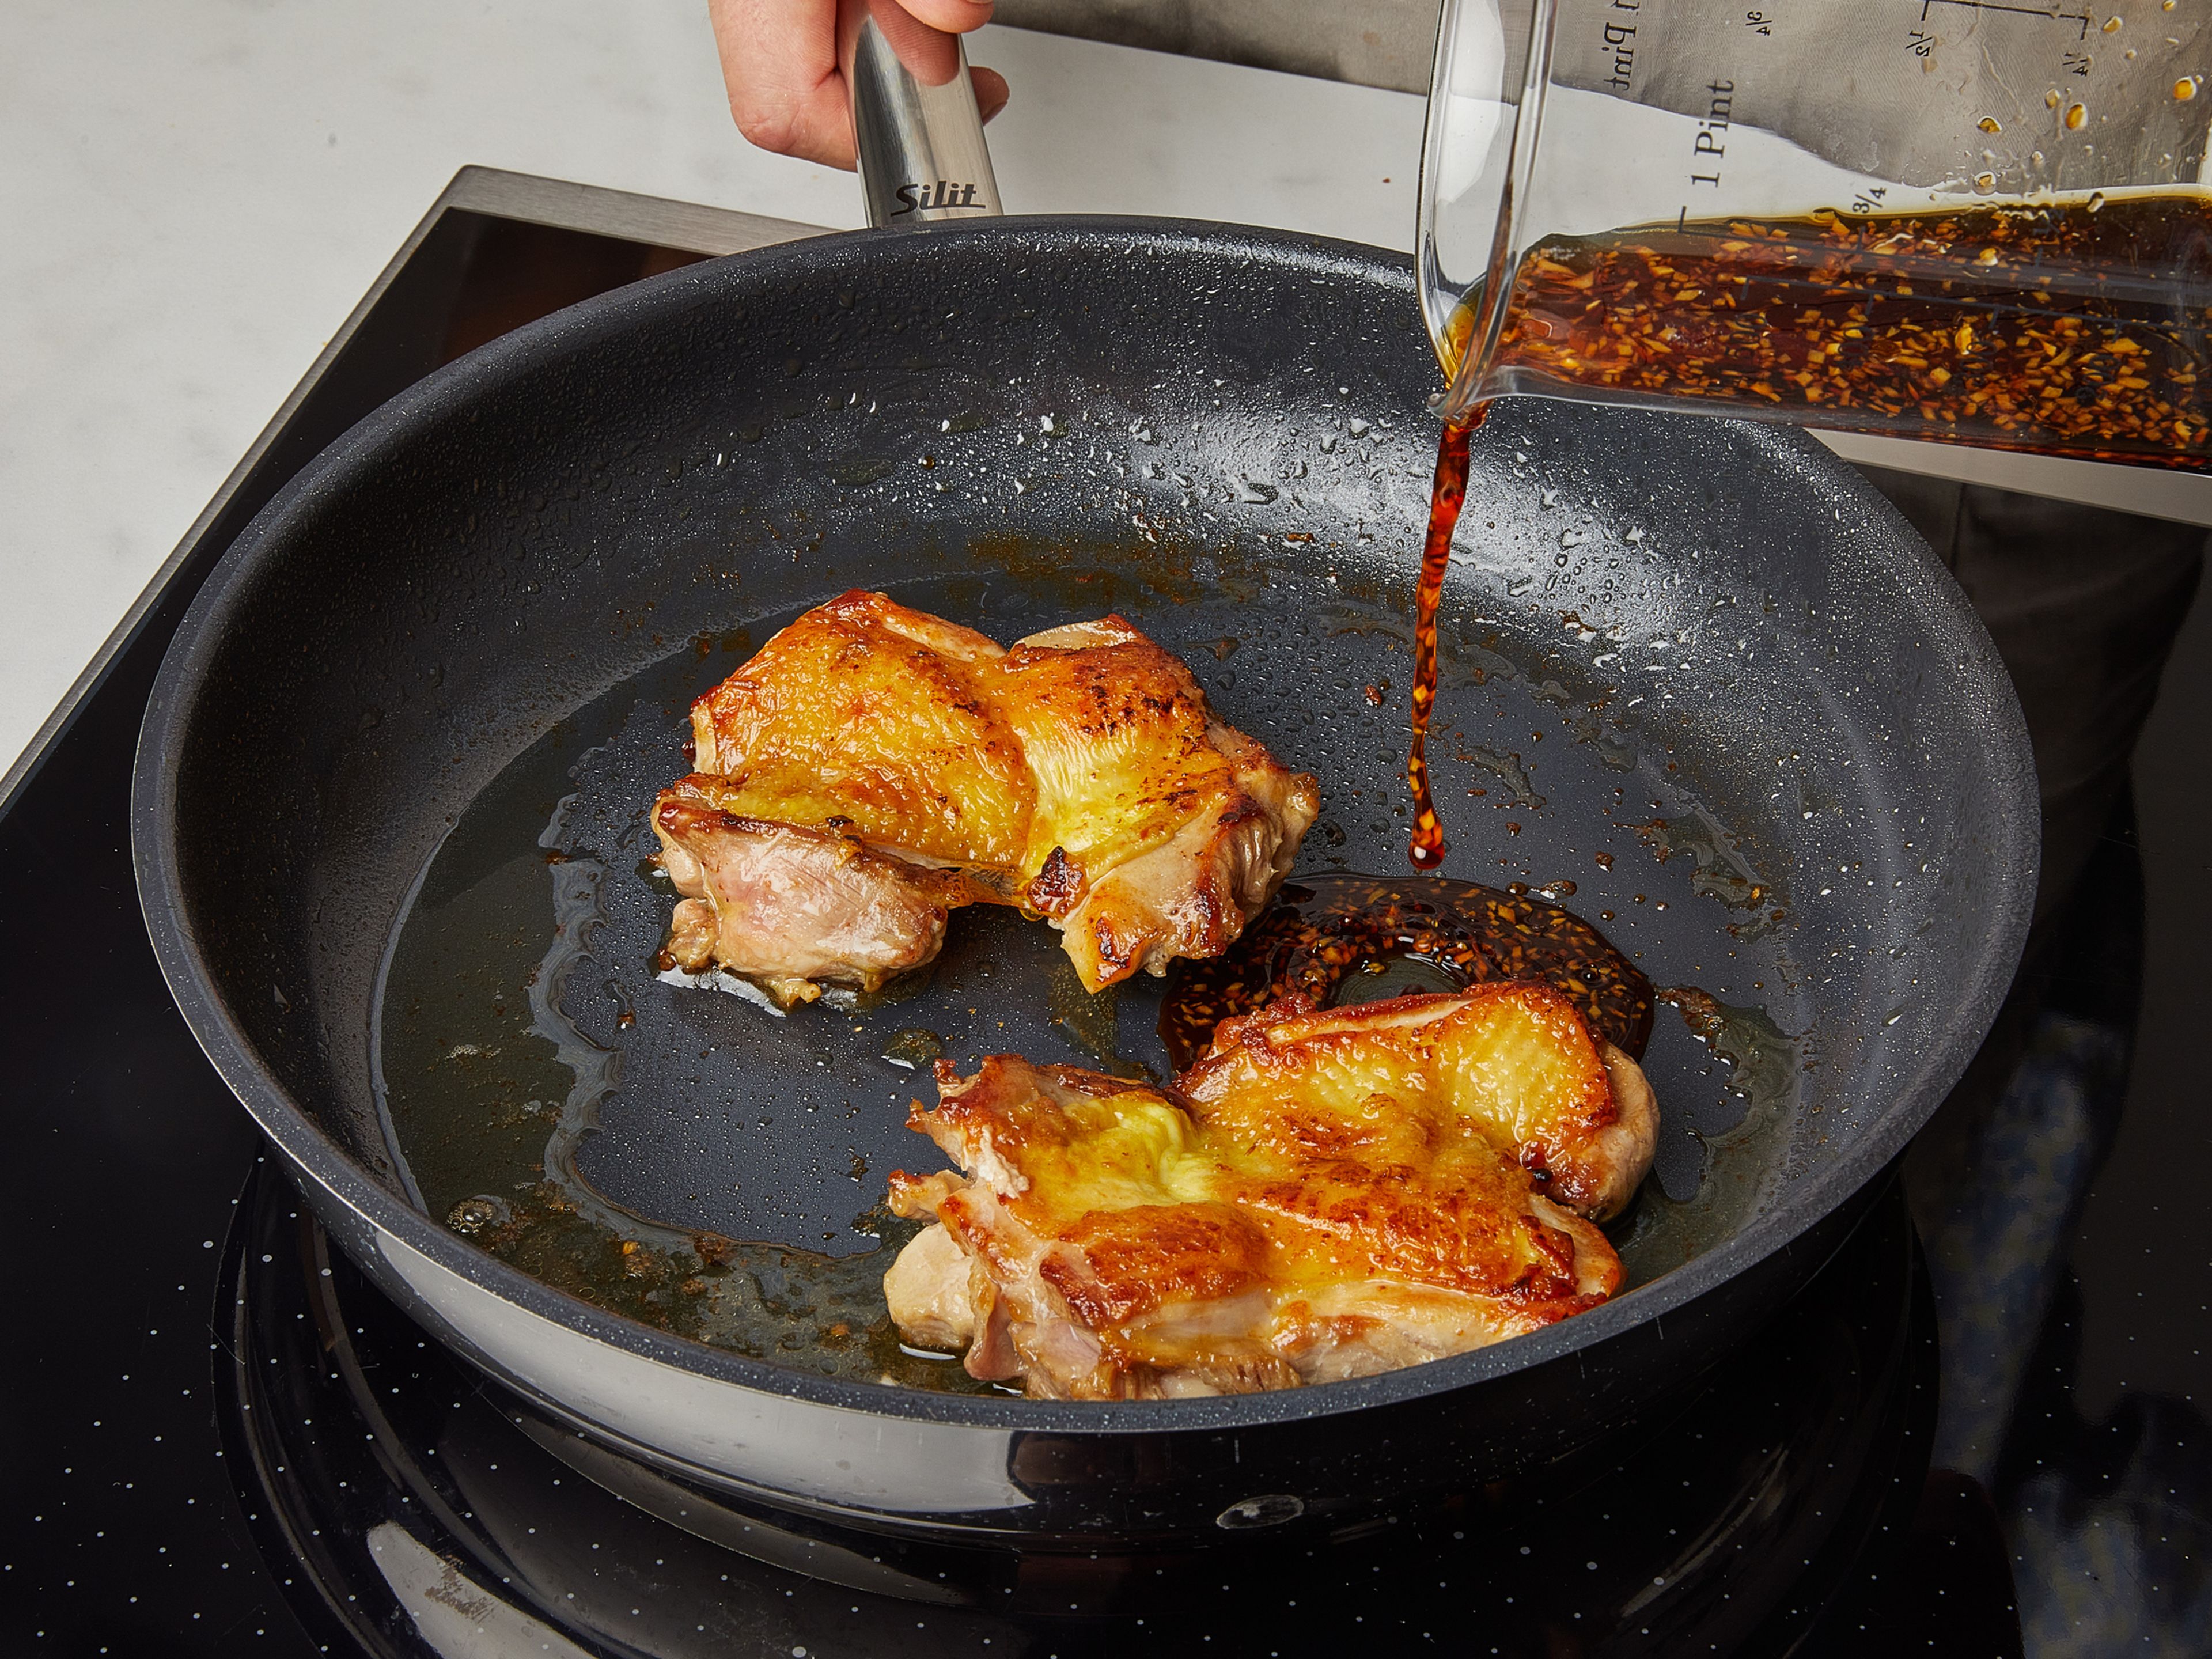 In a frying pan, heat vegetable oil over medium heat, add chicken thighs skin-side down and fry until the skin is golden brown, flip and fry the other side until golden and chicken is cooked through, about 4-6 minutes per side. Lower the heat, flip the chicken thighs so the skin side is facing up, add the teriyaki sauce, let simmer until small bubbles form and the sauce is reduced and becomes syrupy, for about 3 min. Remove from the pan, and reserve the sauce.